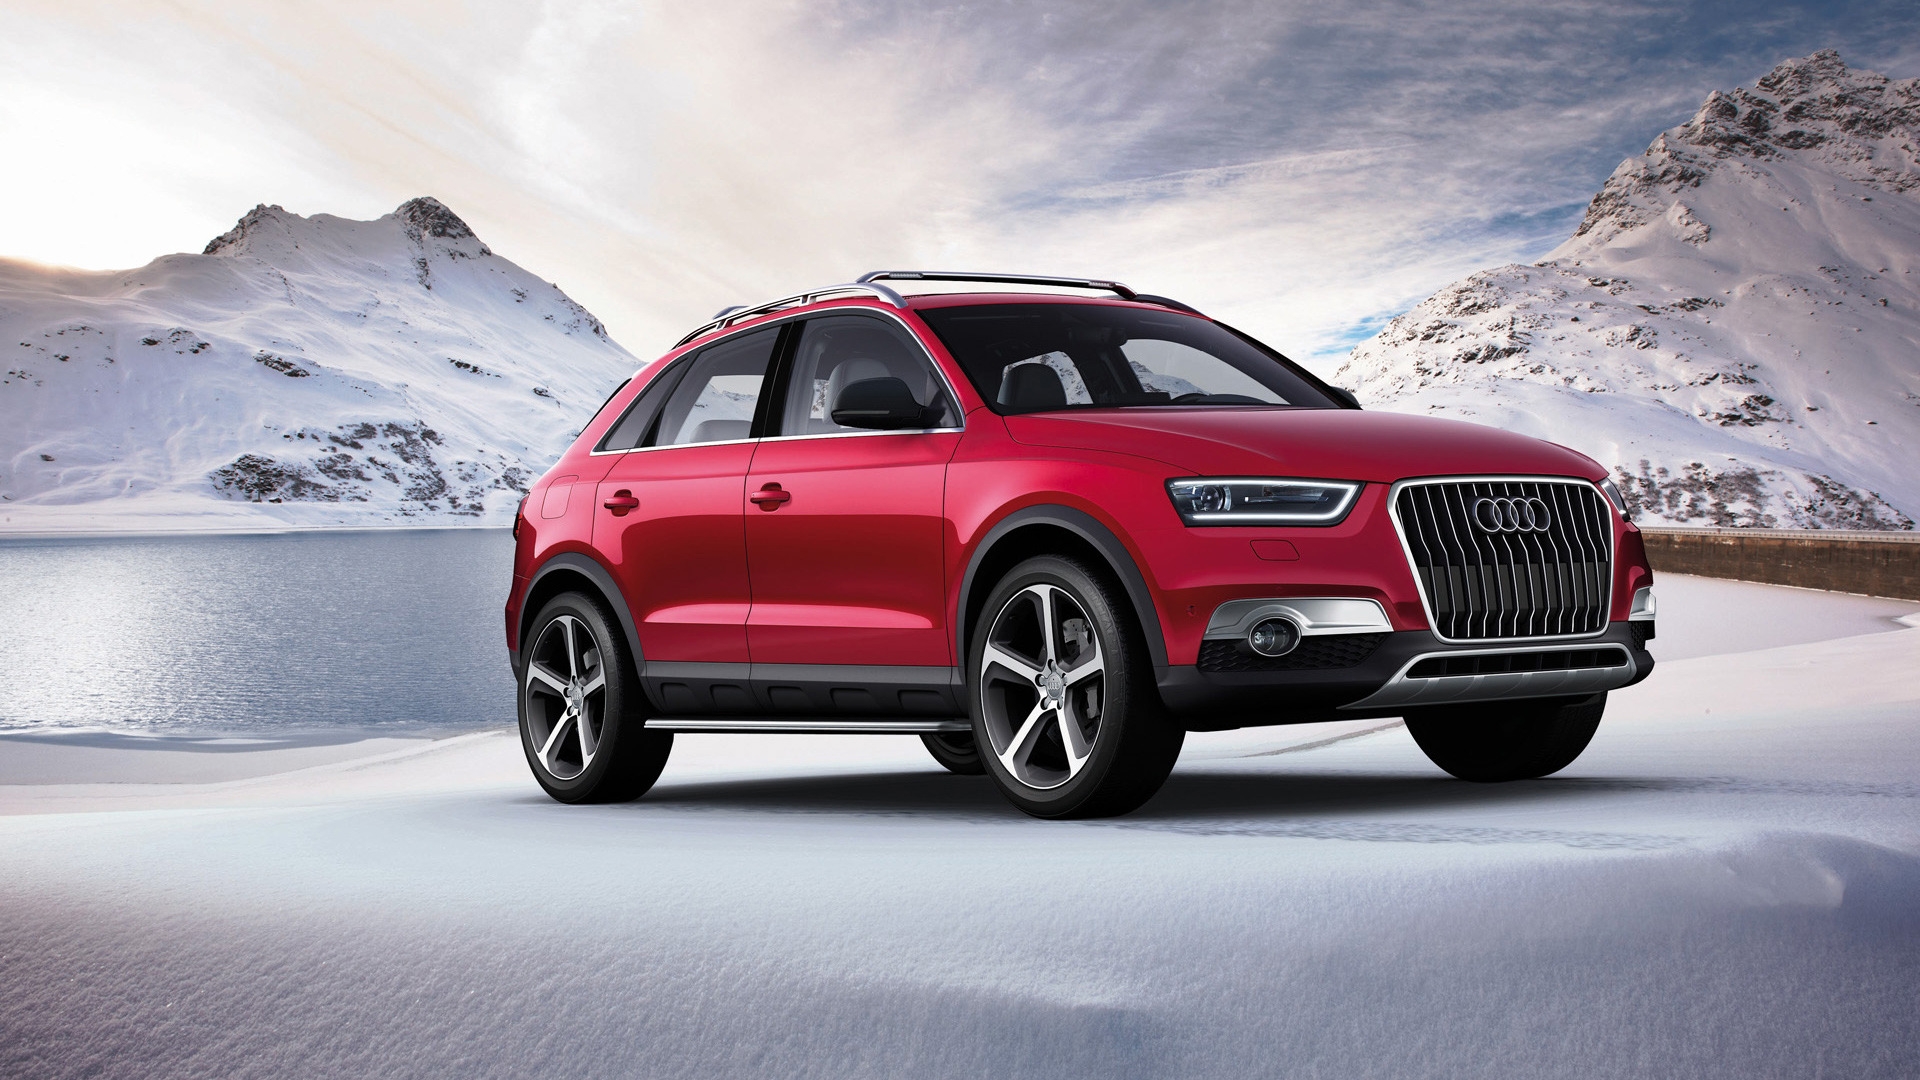 2012 Audi Q3 Vail for 1920 x 1080 HDTV 1080p resolution